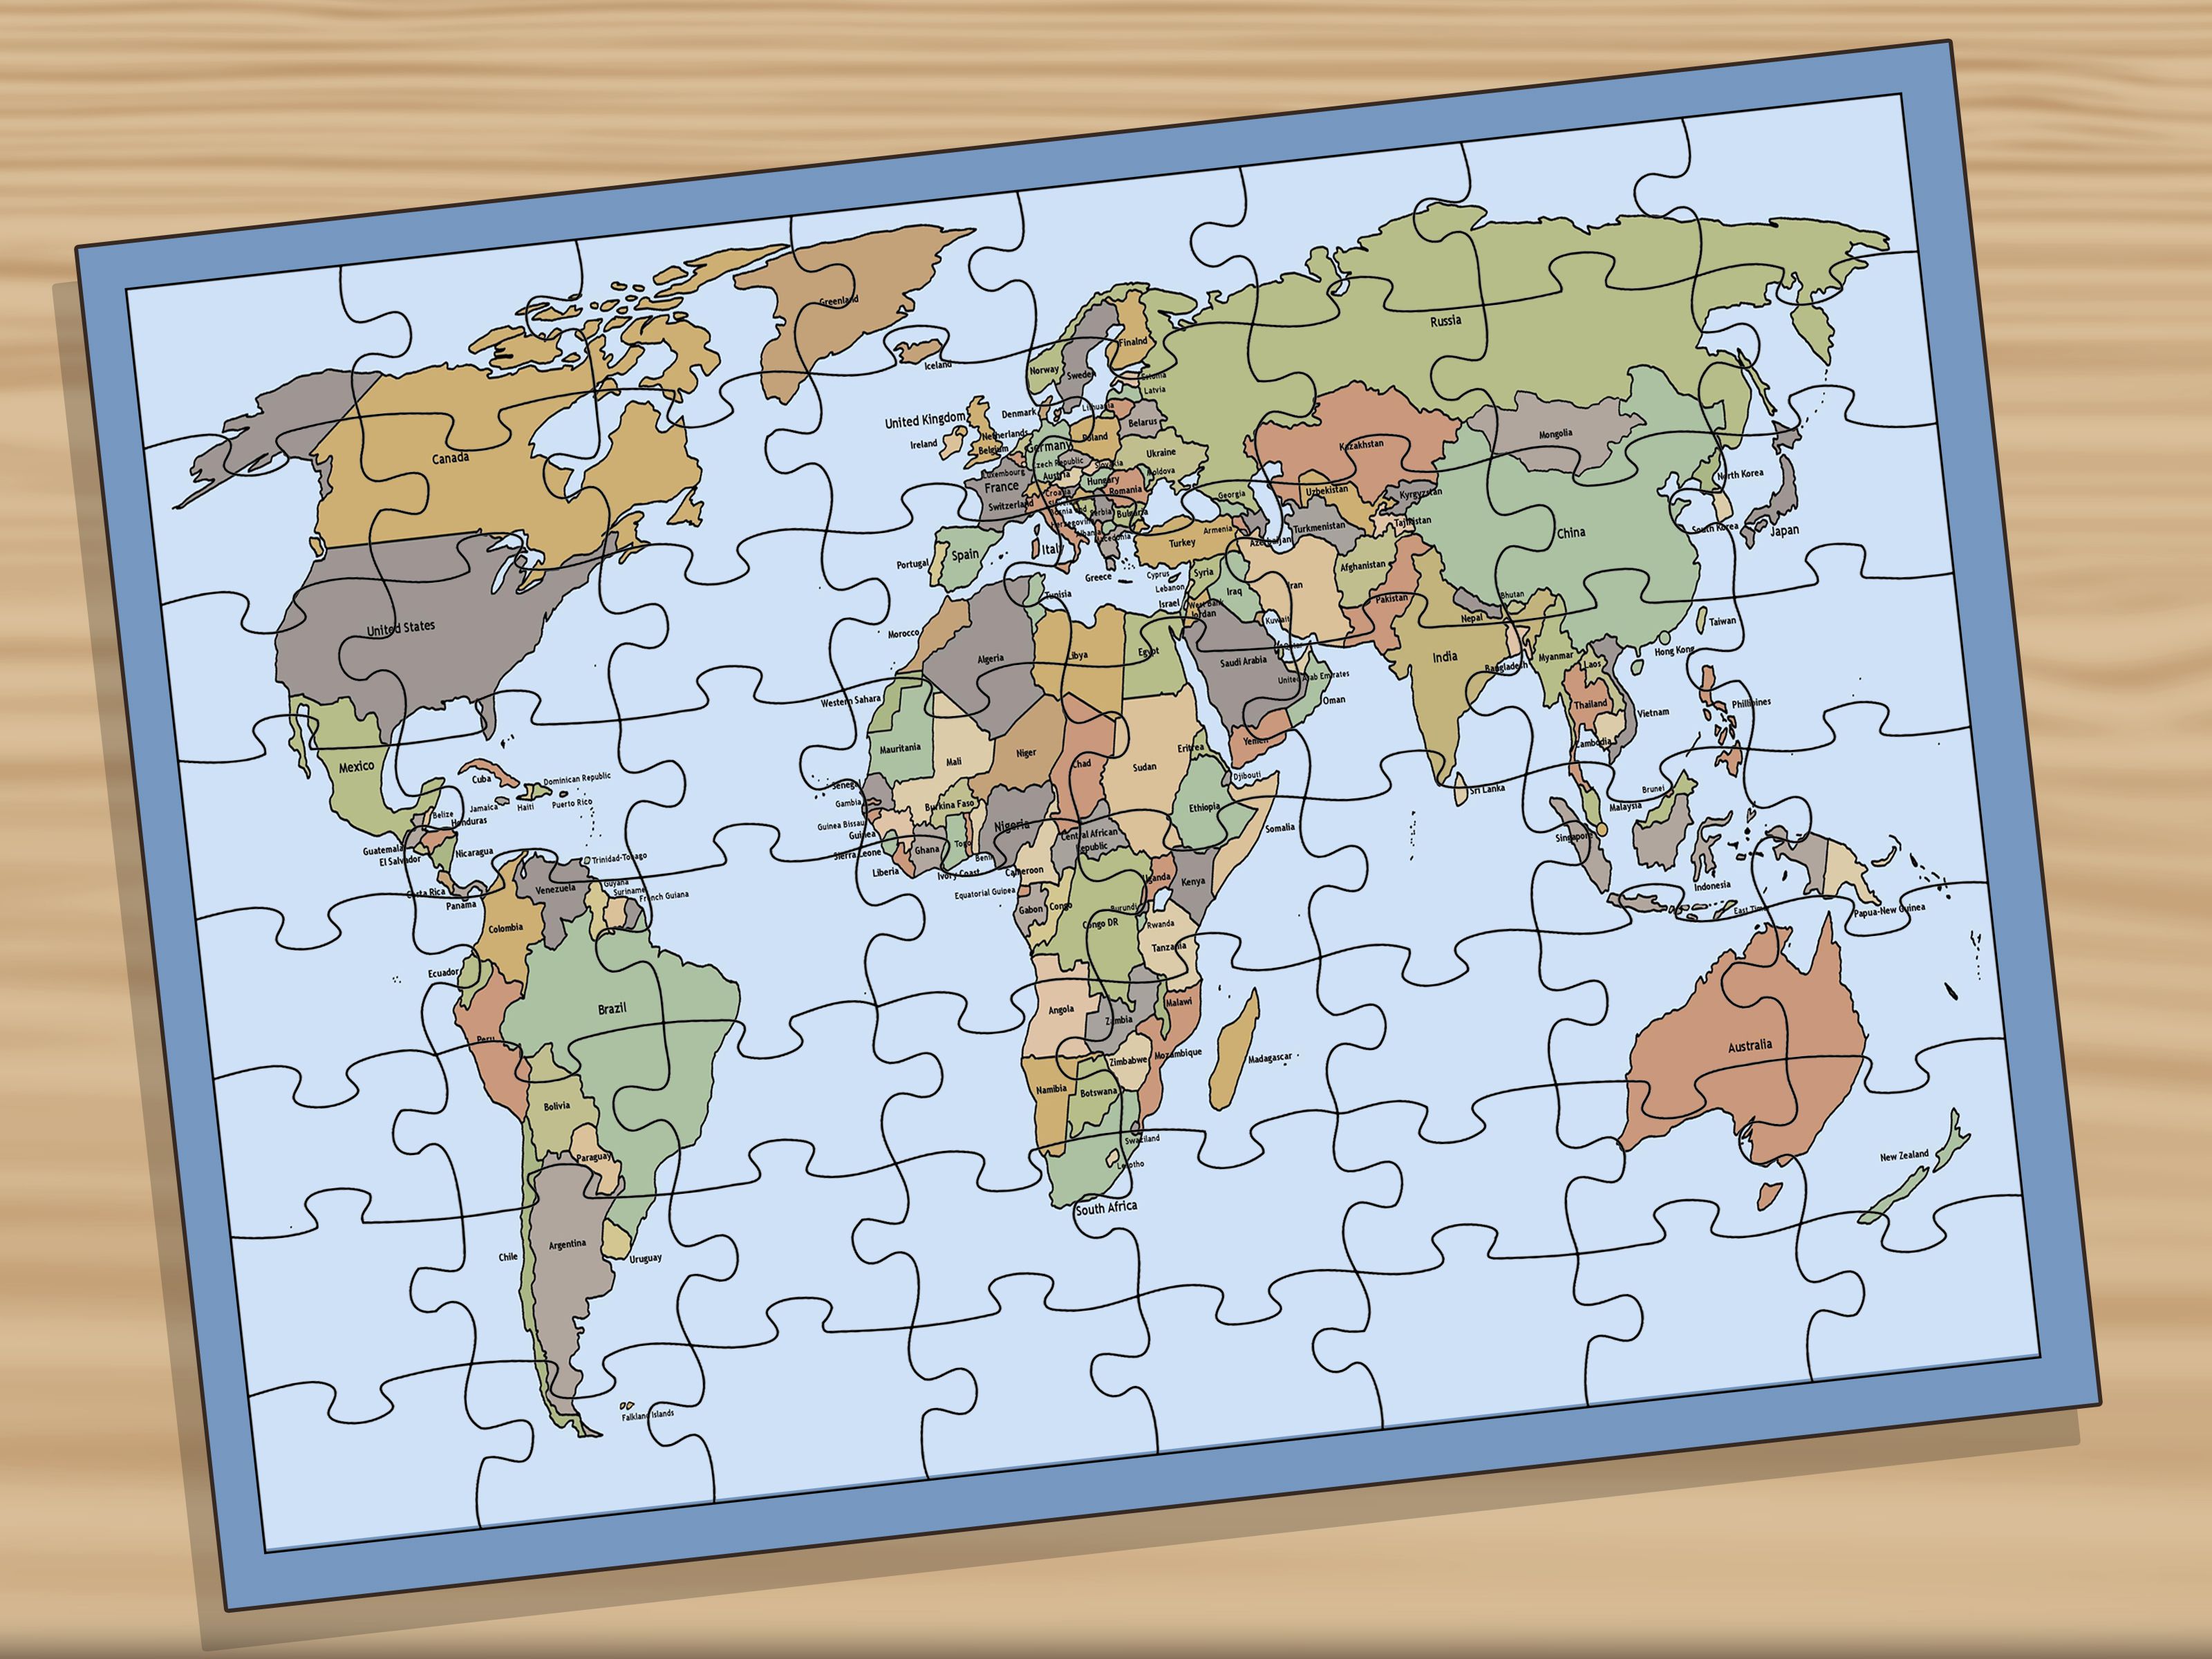 Ways to Memorise the Locations of Countries on a World Map